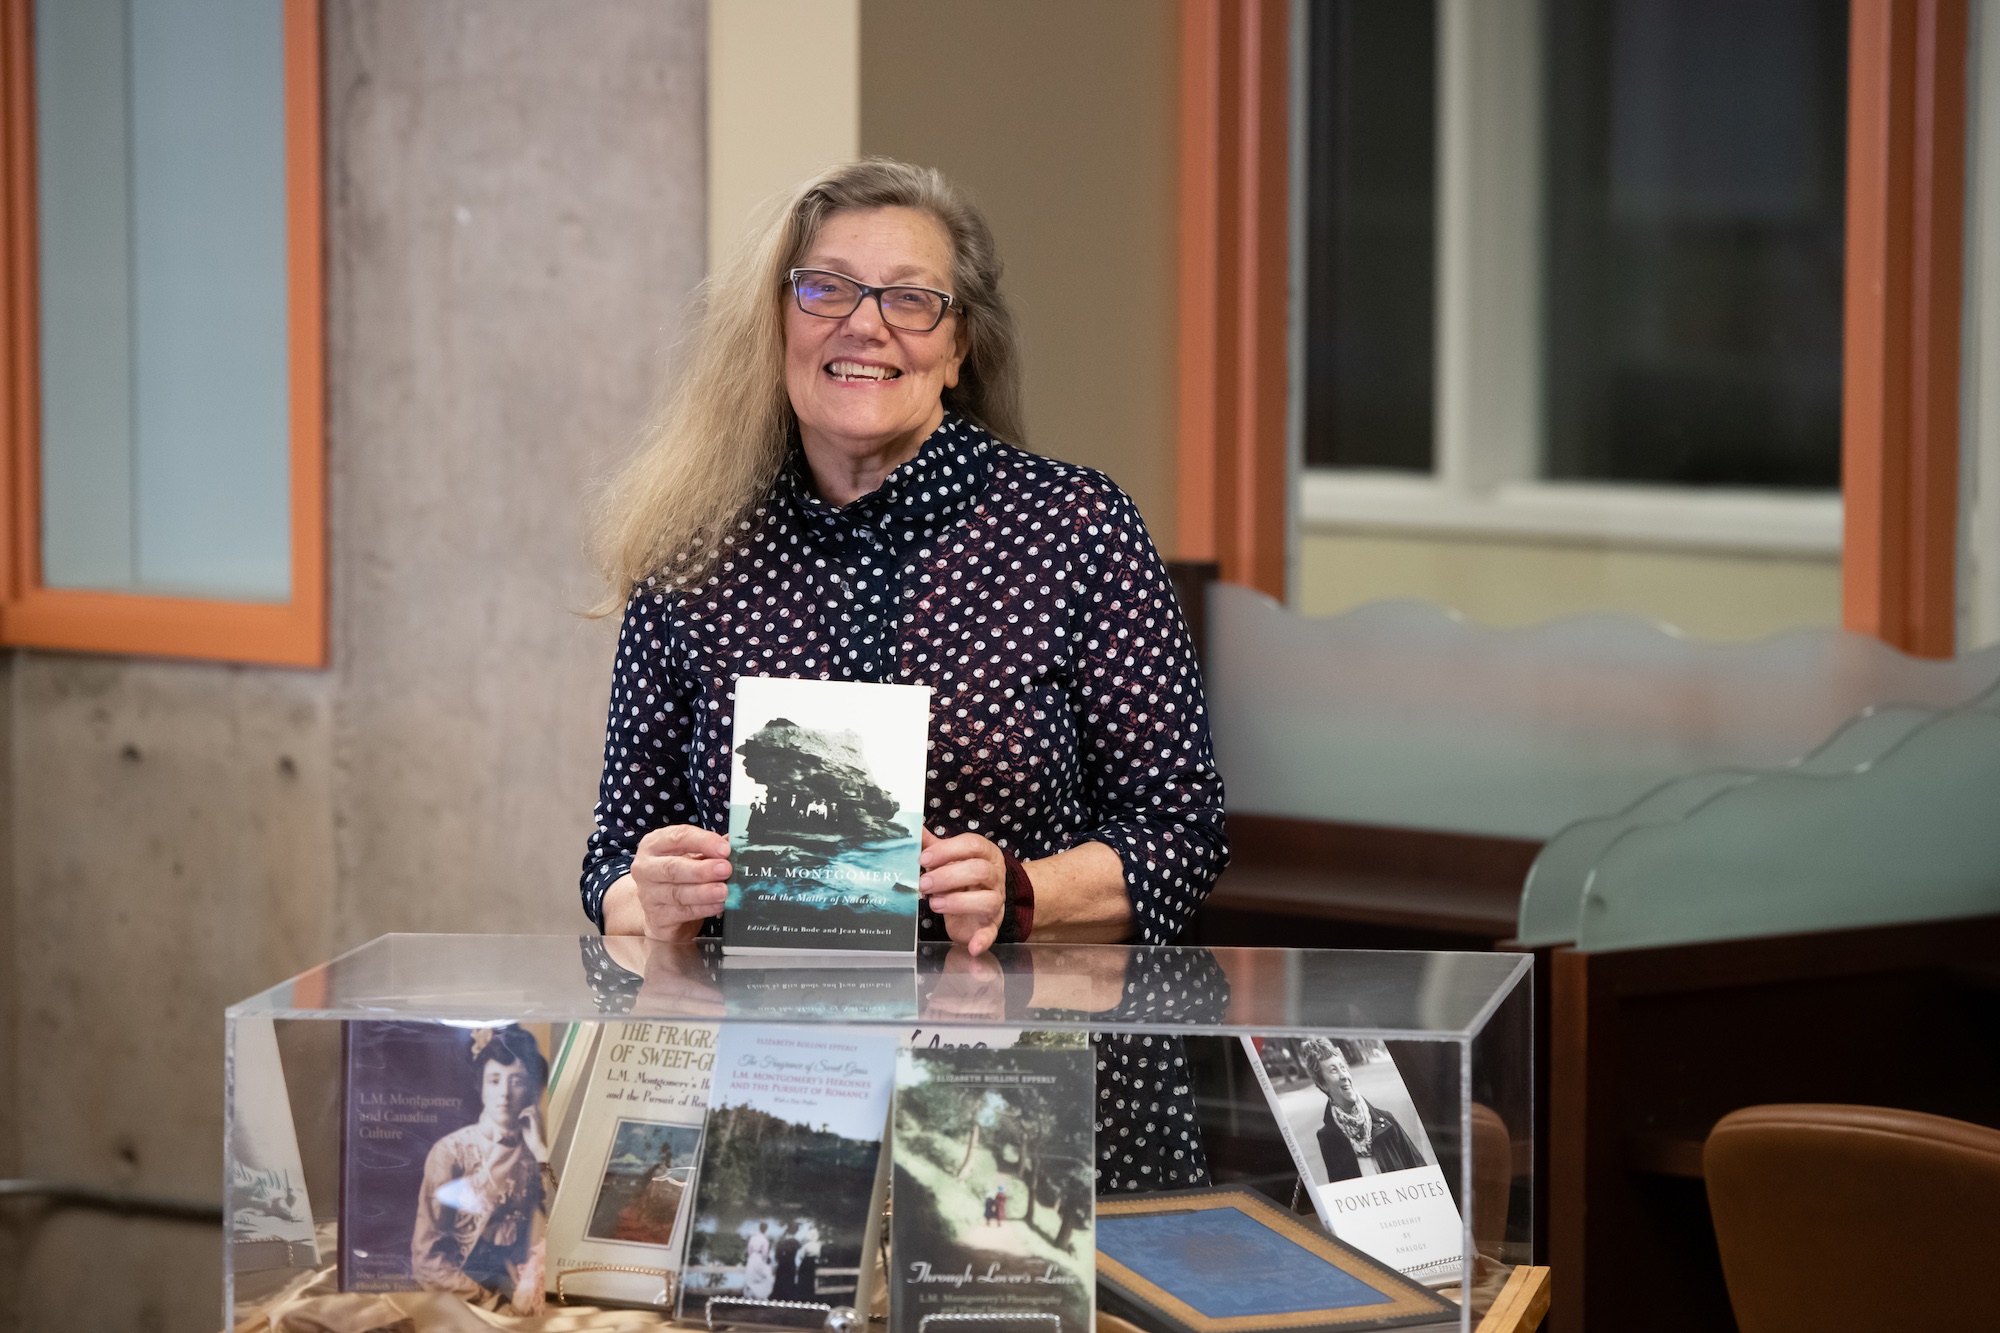 dr. jean mitchell in upei's robertson library holding a book she has written